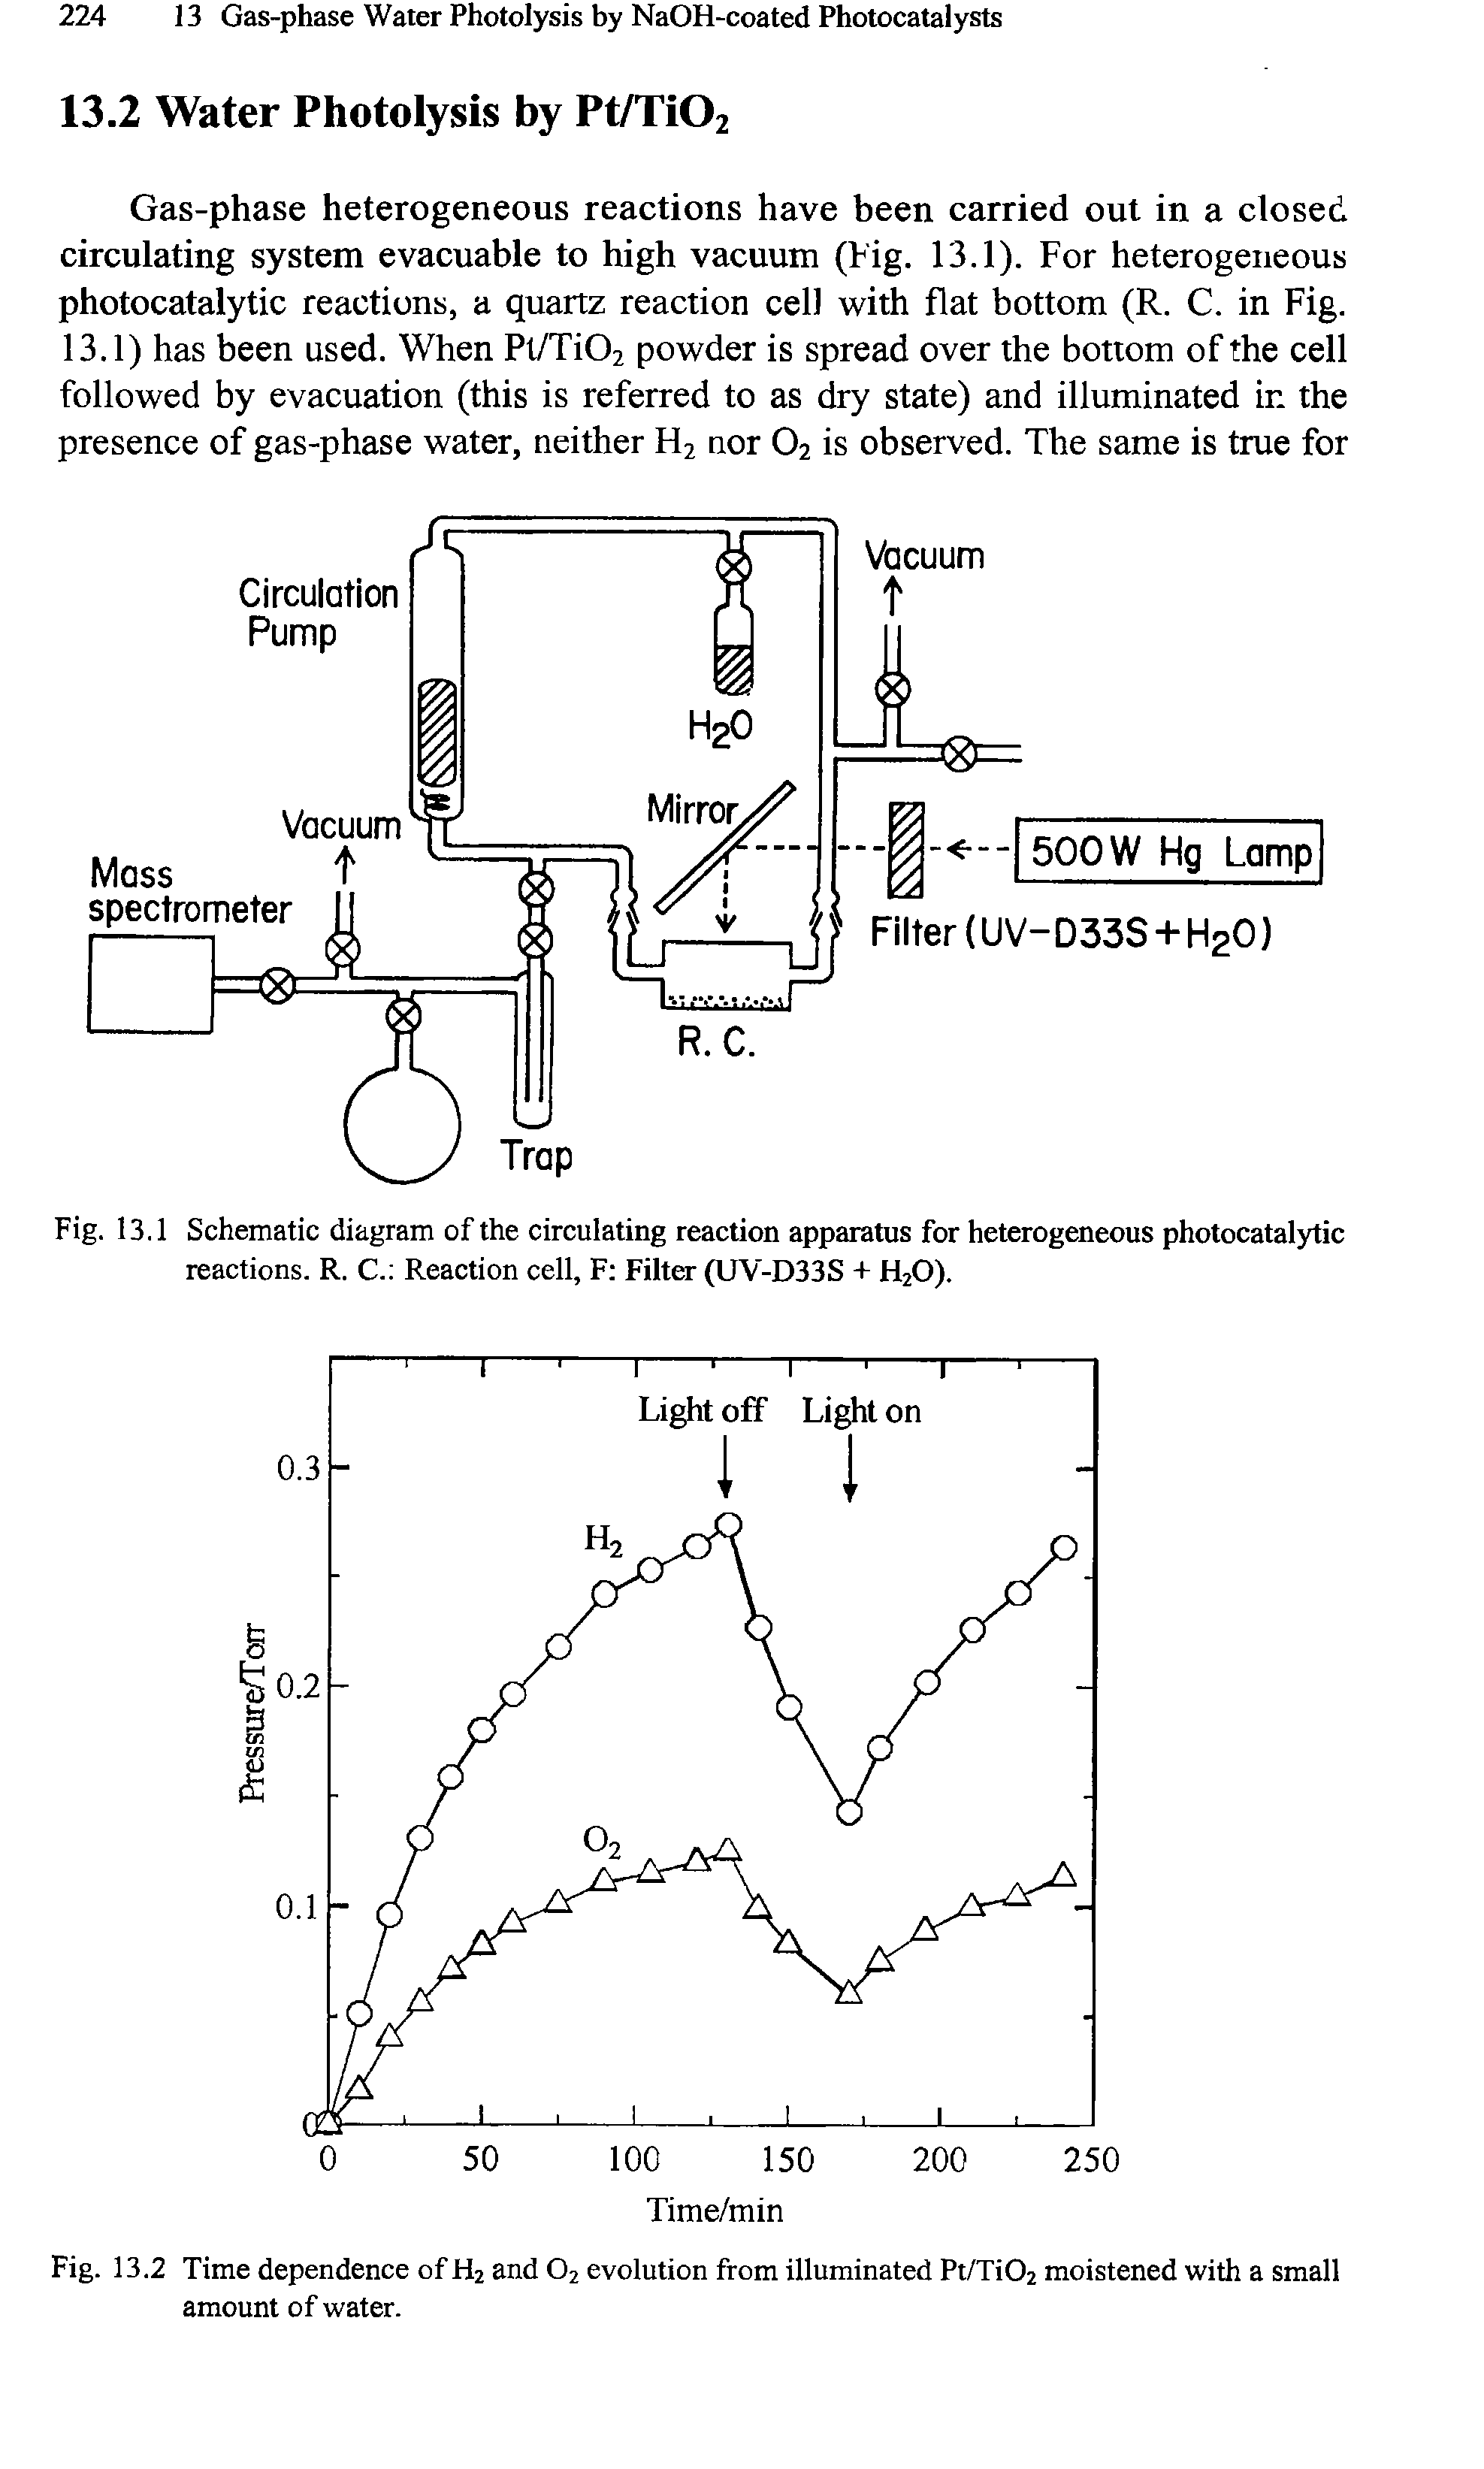 Fig. 13.1 Schematic diagram of the circulating reaction apparatus for heterogeneous photocatalytic reactions. R. C. Reaction cell, F Filter (UV-D33S + H20).